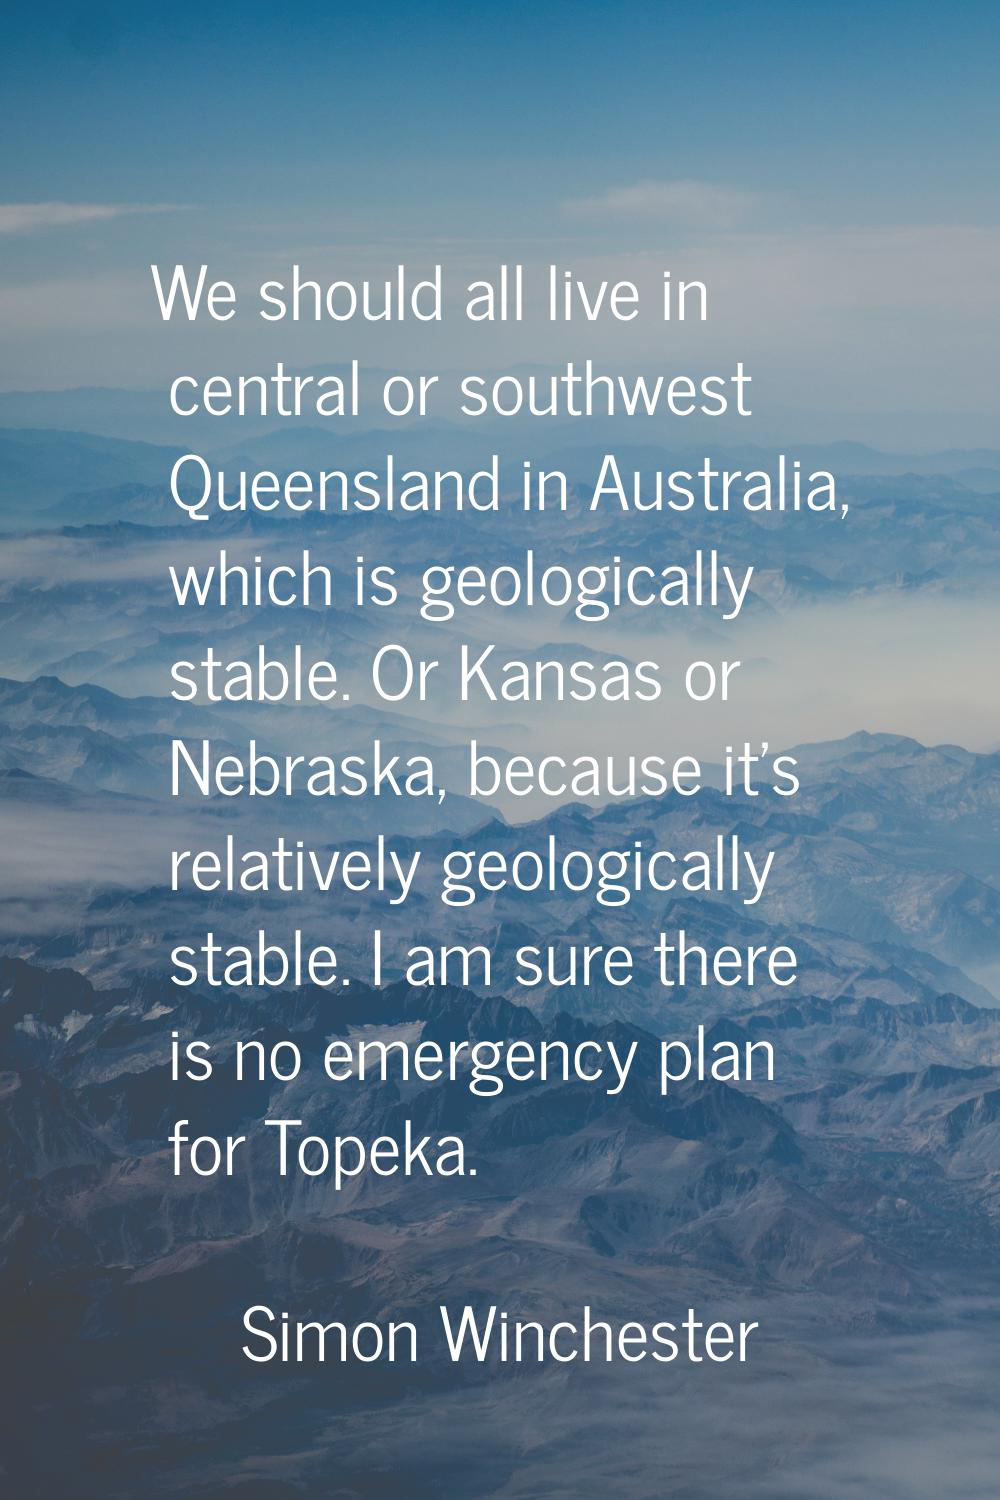 We should all live in central or southwest Queensland in Australia, which is geologically stable. O